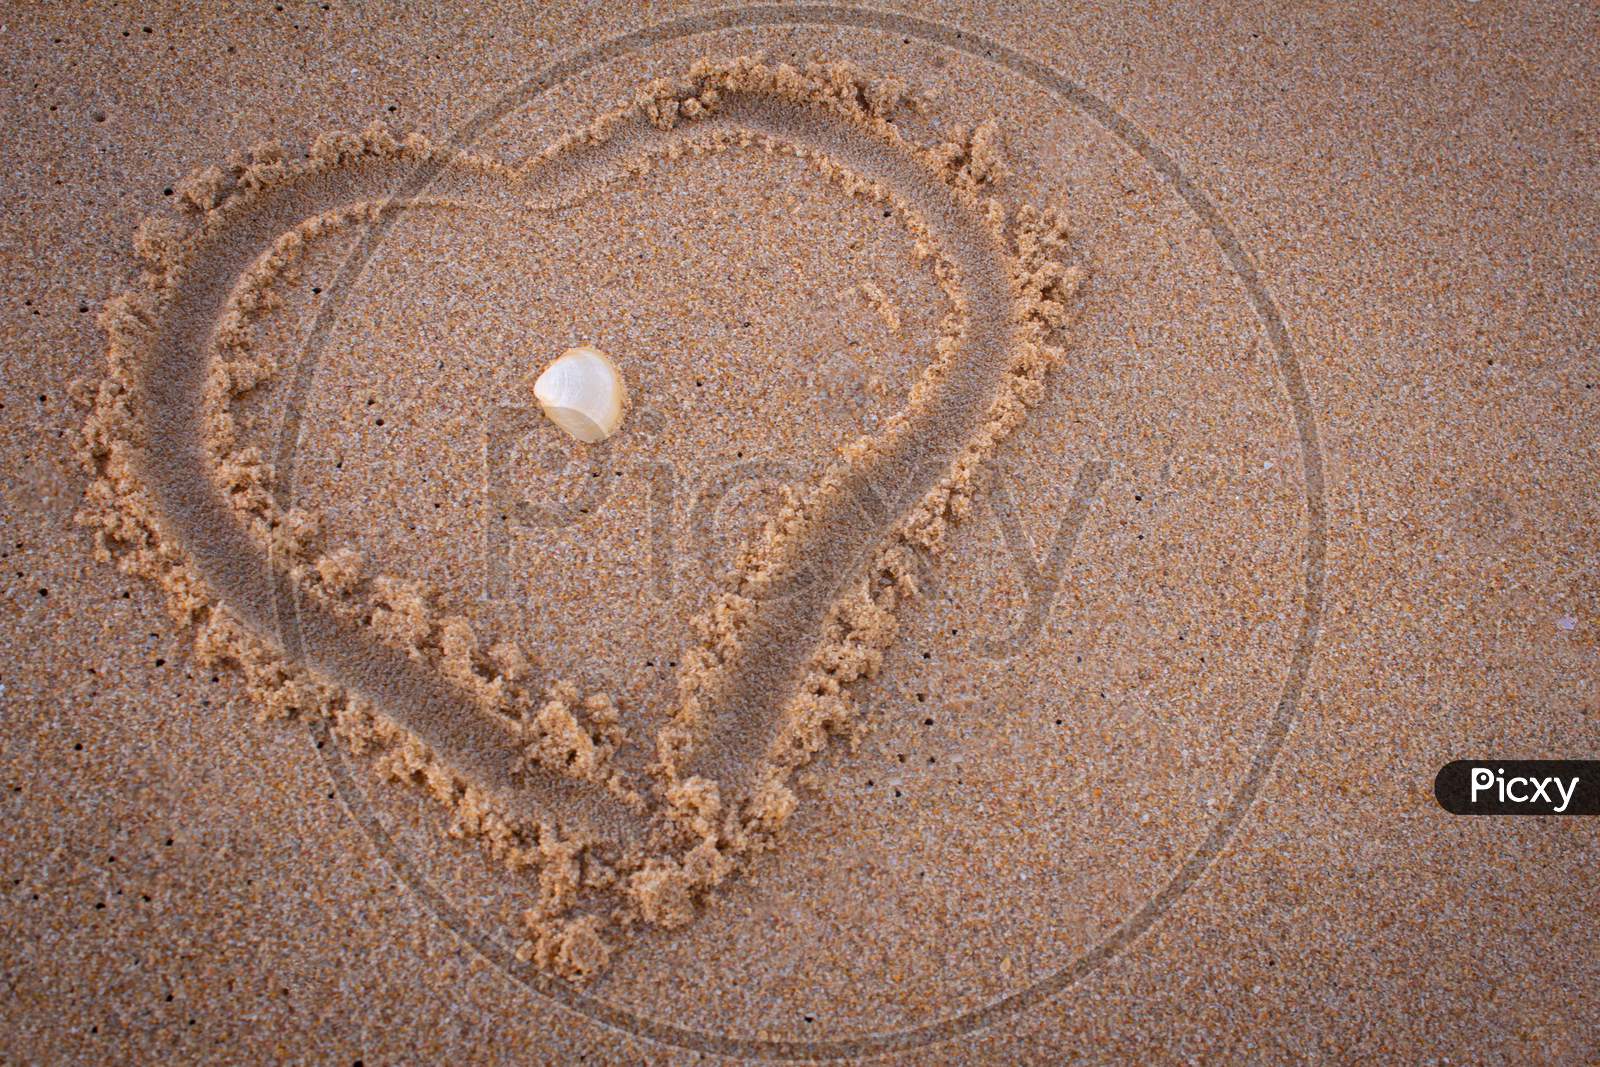 Beautiful Heart Symbol In Beach Sand With Sea Shell In Middle. Focus Set On Seashell.